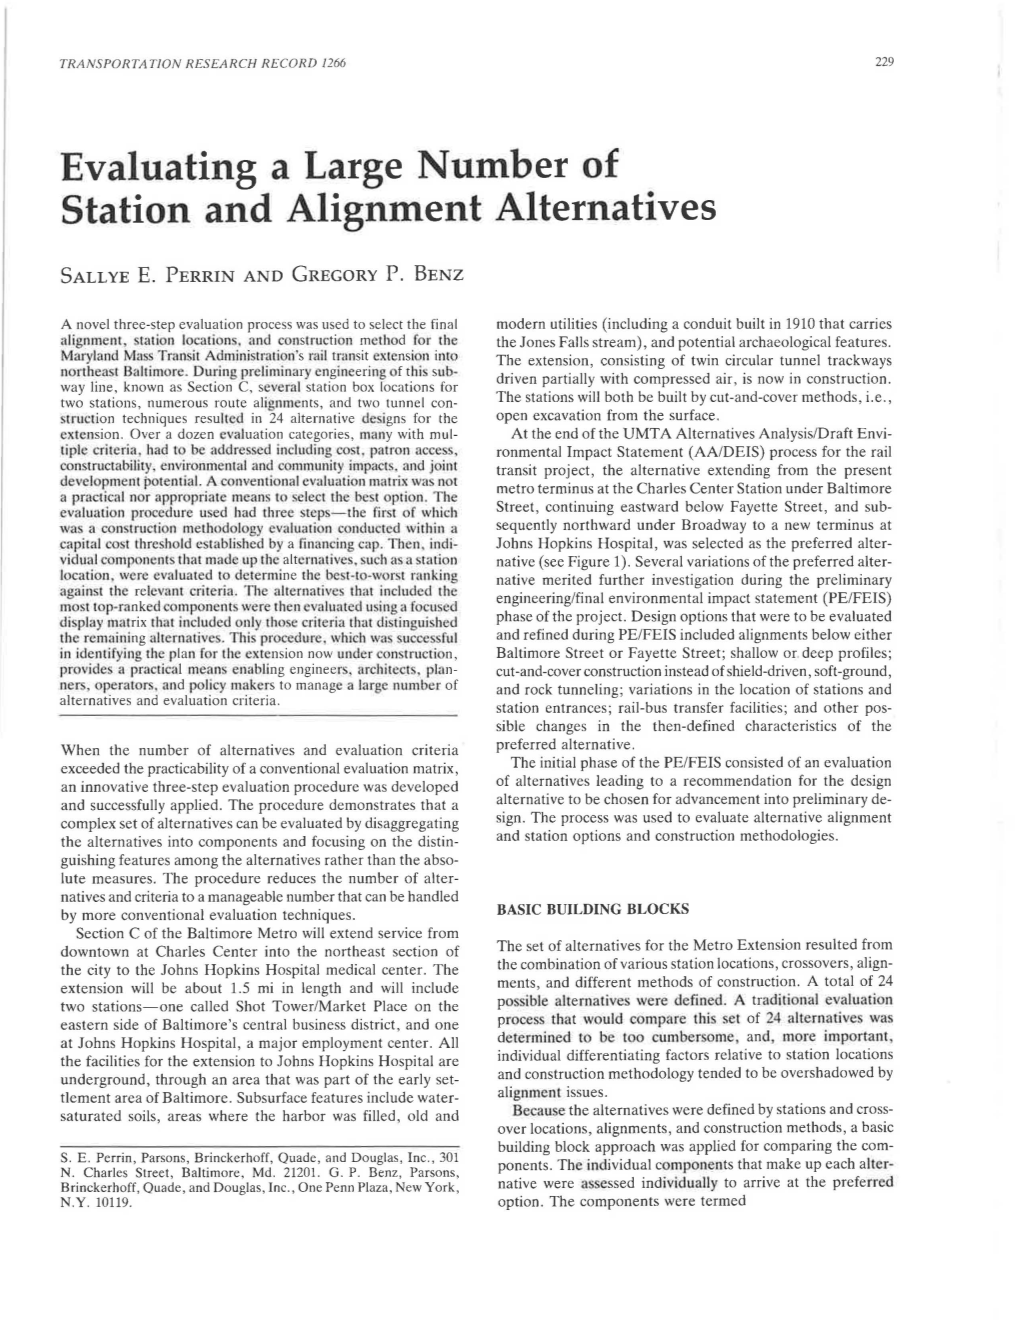 Evaluating a Large Number of Station and Alignment Alternatives